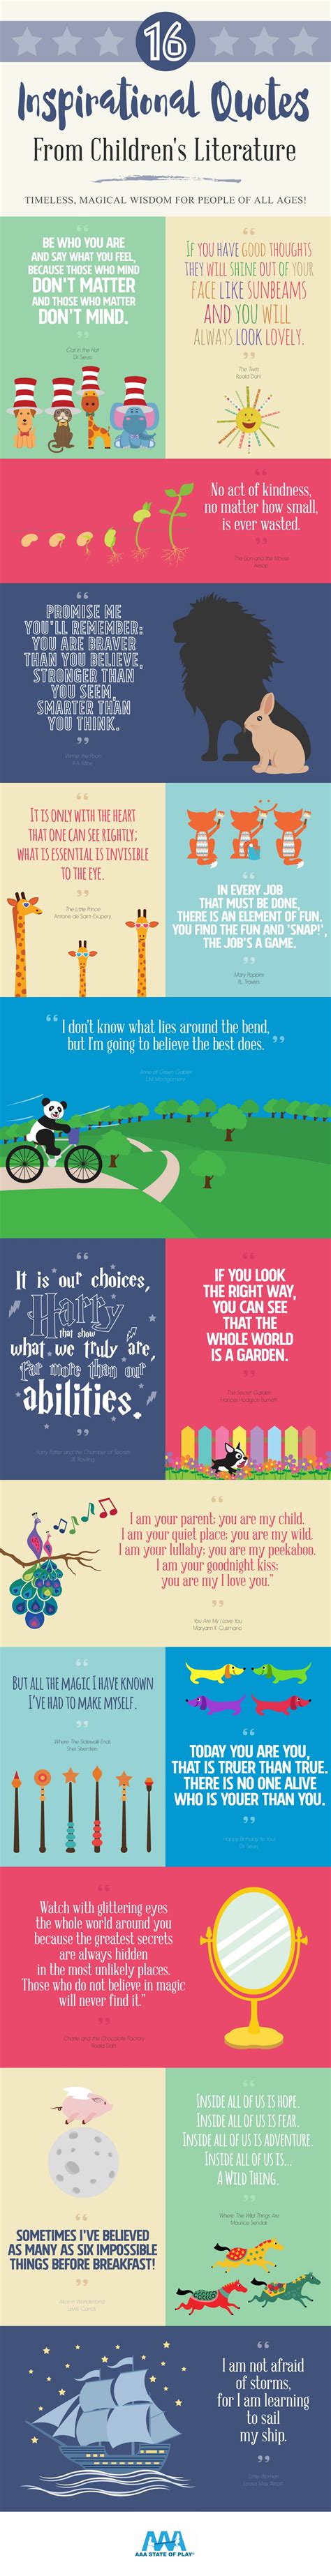 Inspirational Quotes from Children's Literature infographic - e-Learning Infographics